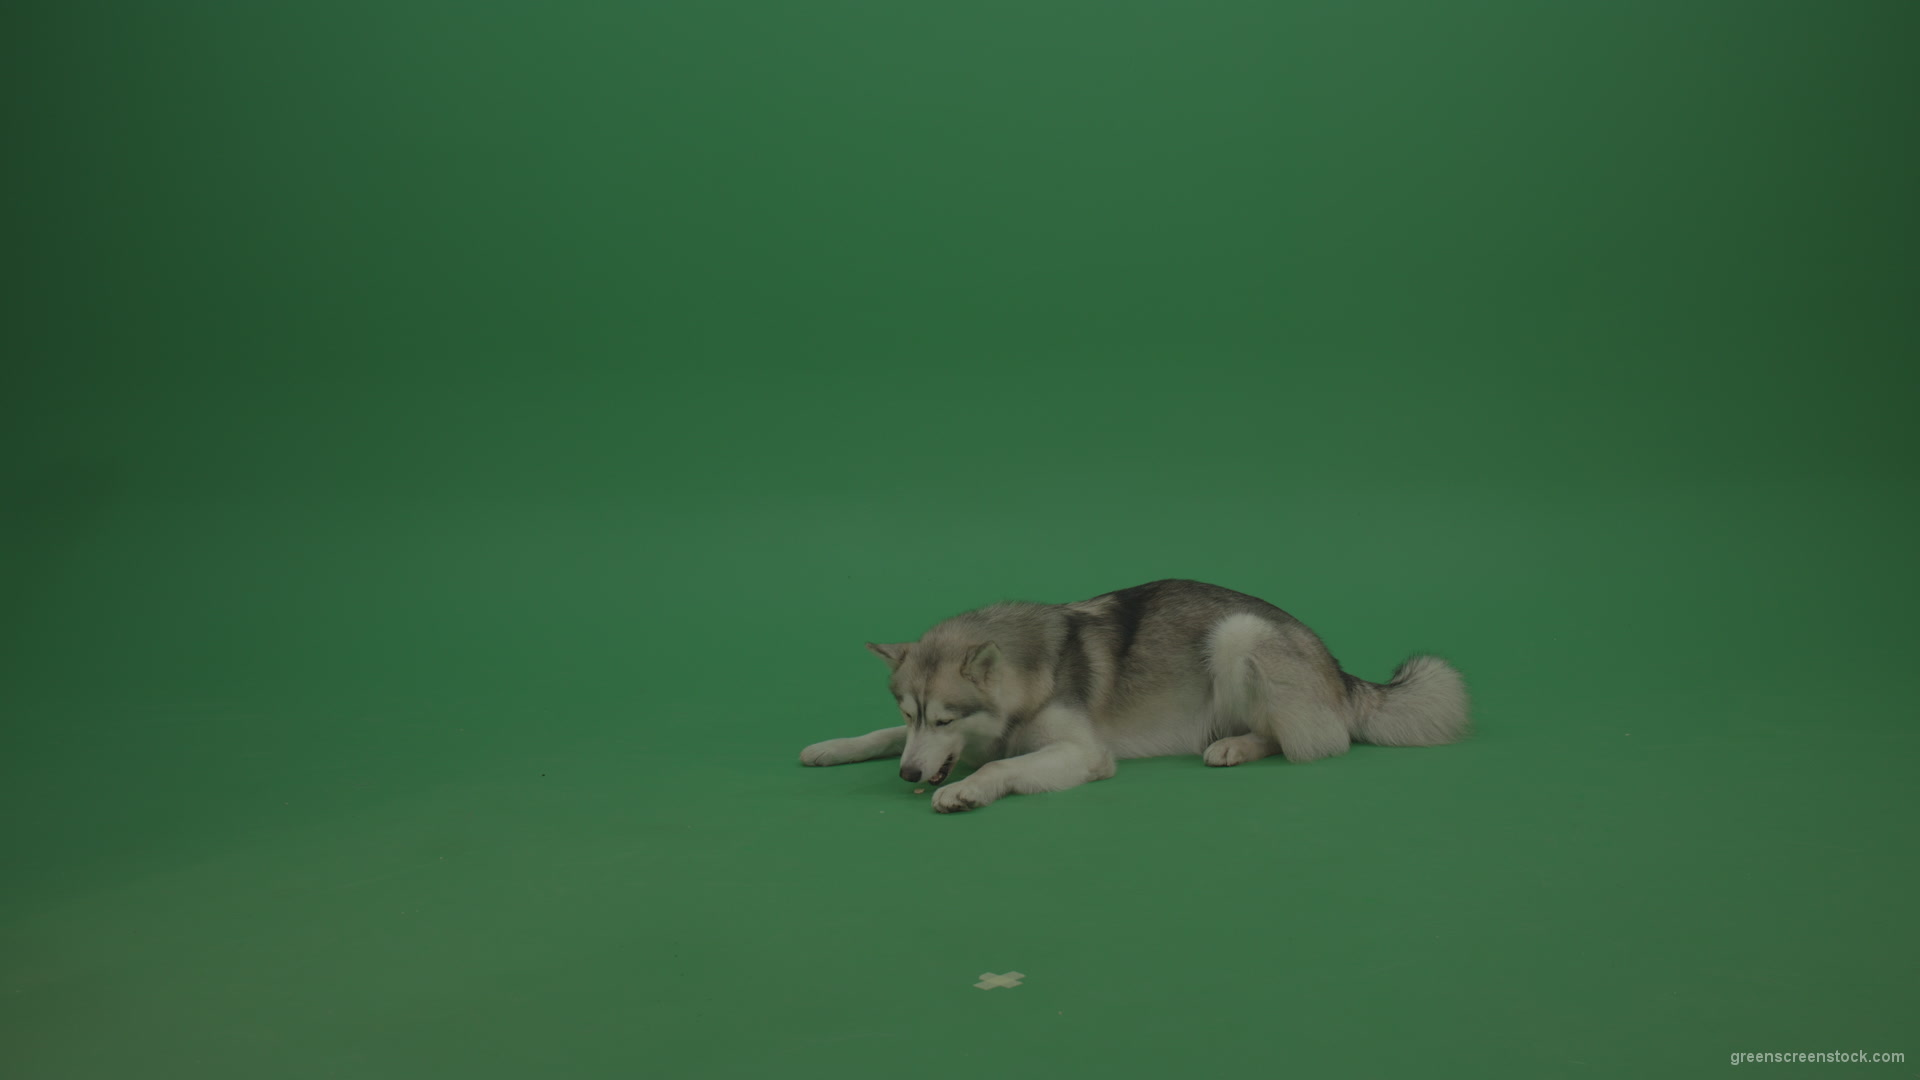 Grey_White_Huskie_Dog_Lying_On_The_Ground_Chewing_Coockie_Stands_Up_And_Walks_Away_Green_Screen_Wall_Background_004 Green Screen Stock